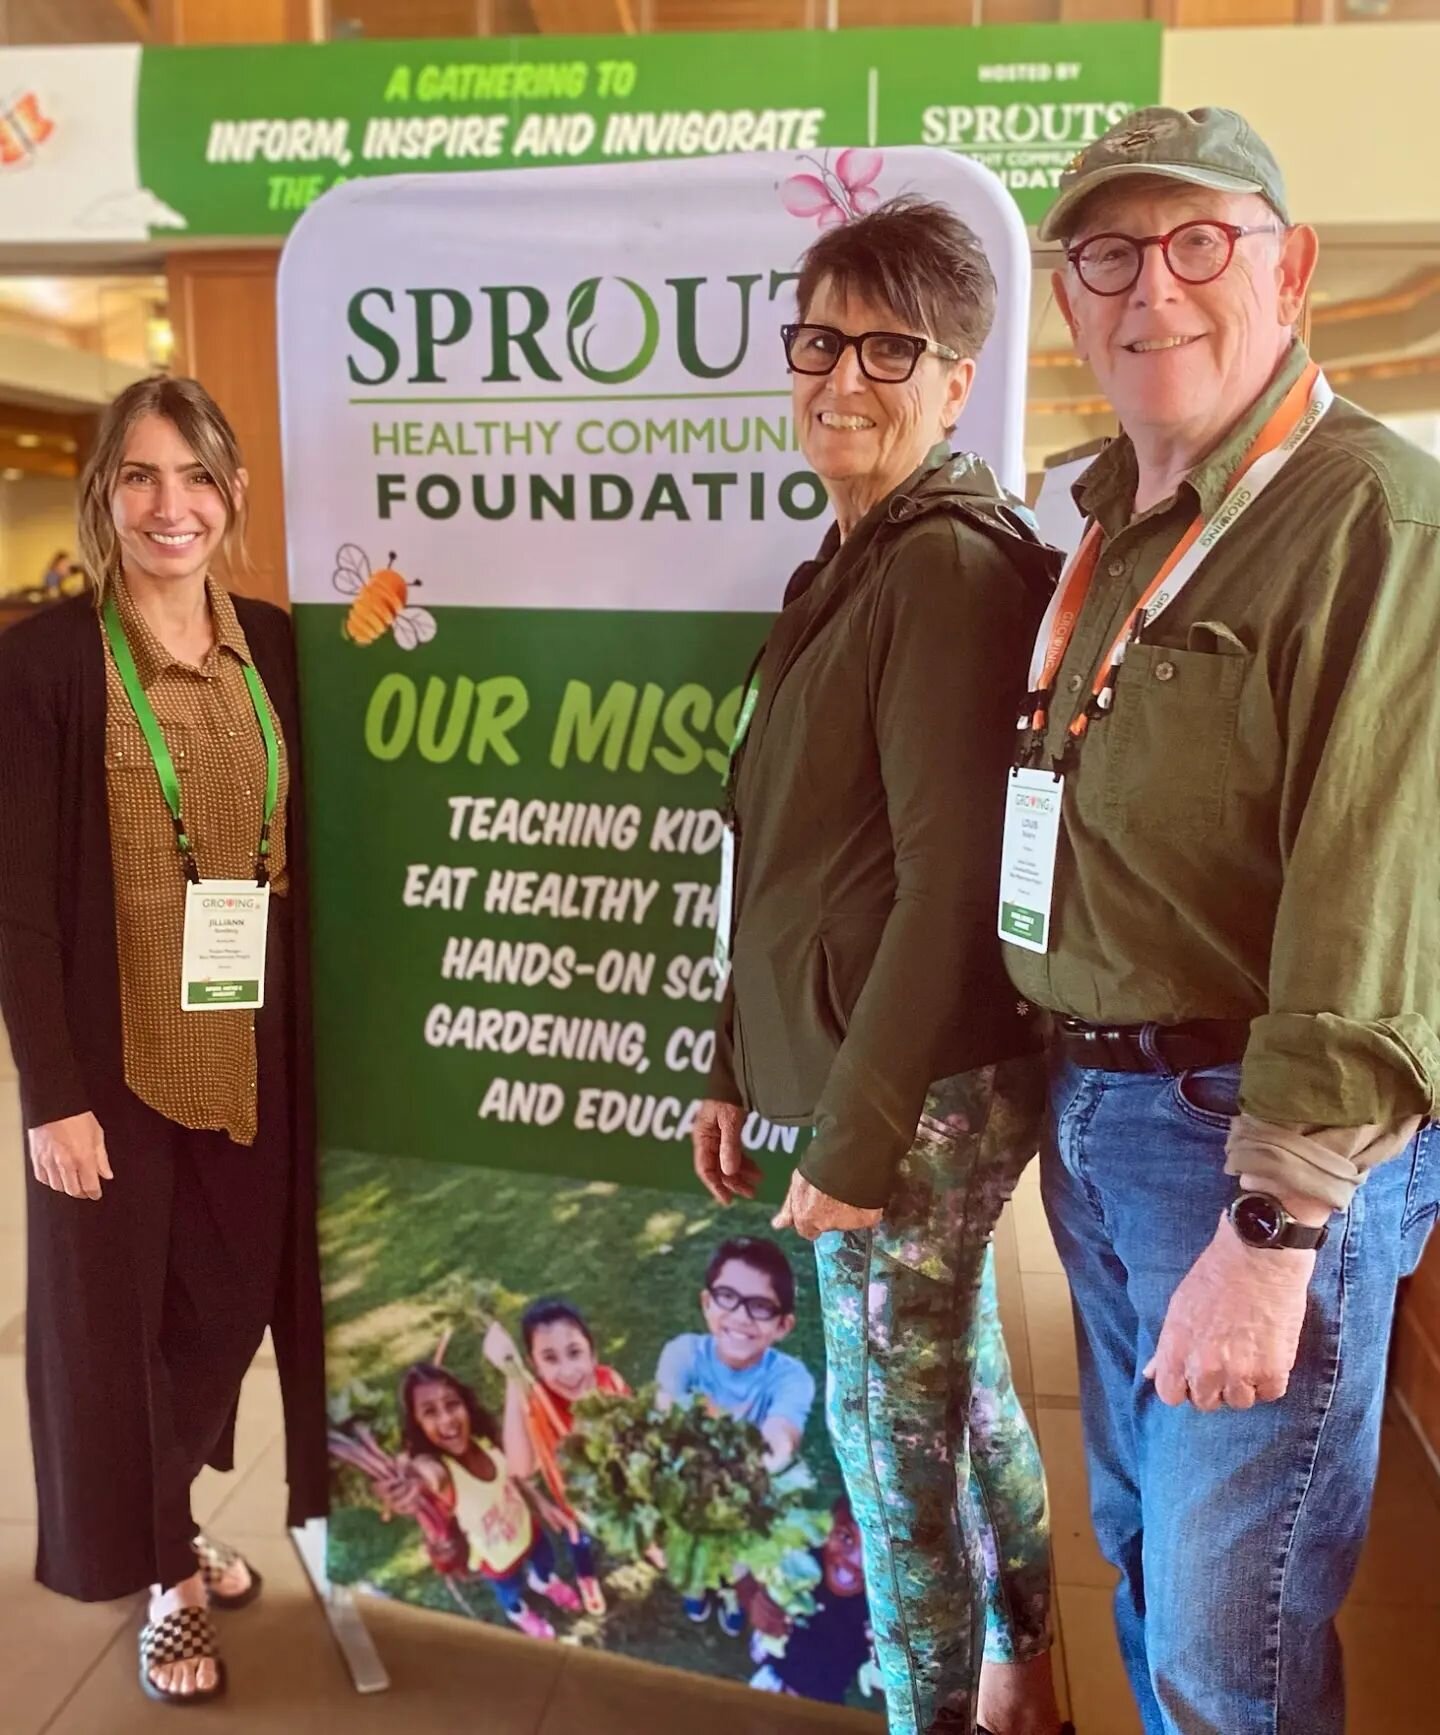 We're grateful to have been able to send this team to the @sproutsfnd School Garden Conference this past weekend! This three-day event helped our team connect with others across the country imbedding school garden best practices at school. We're eage